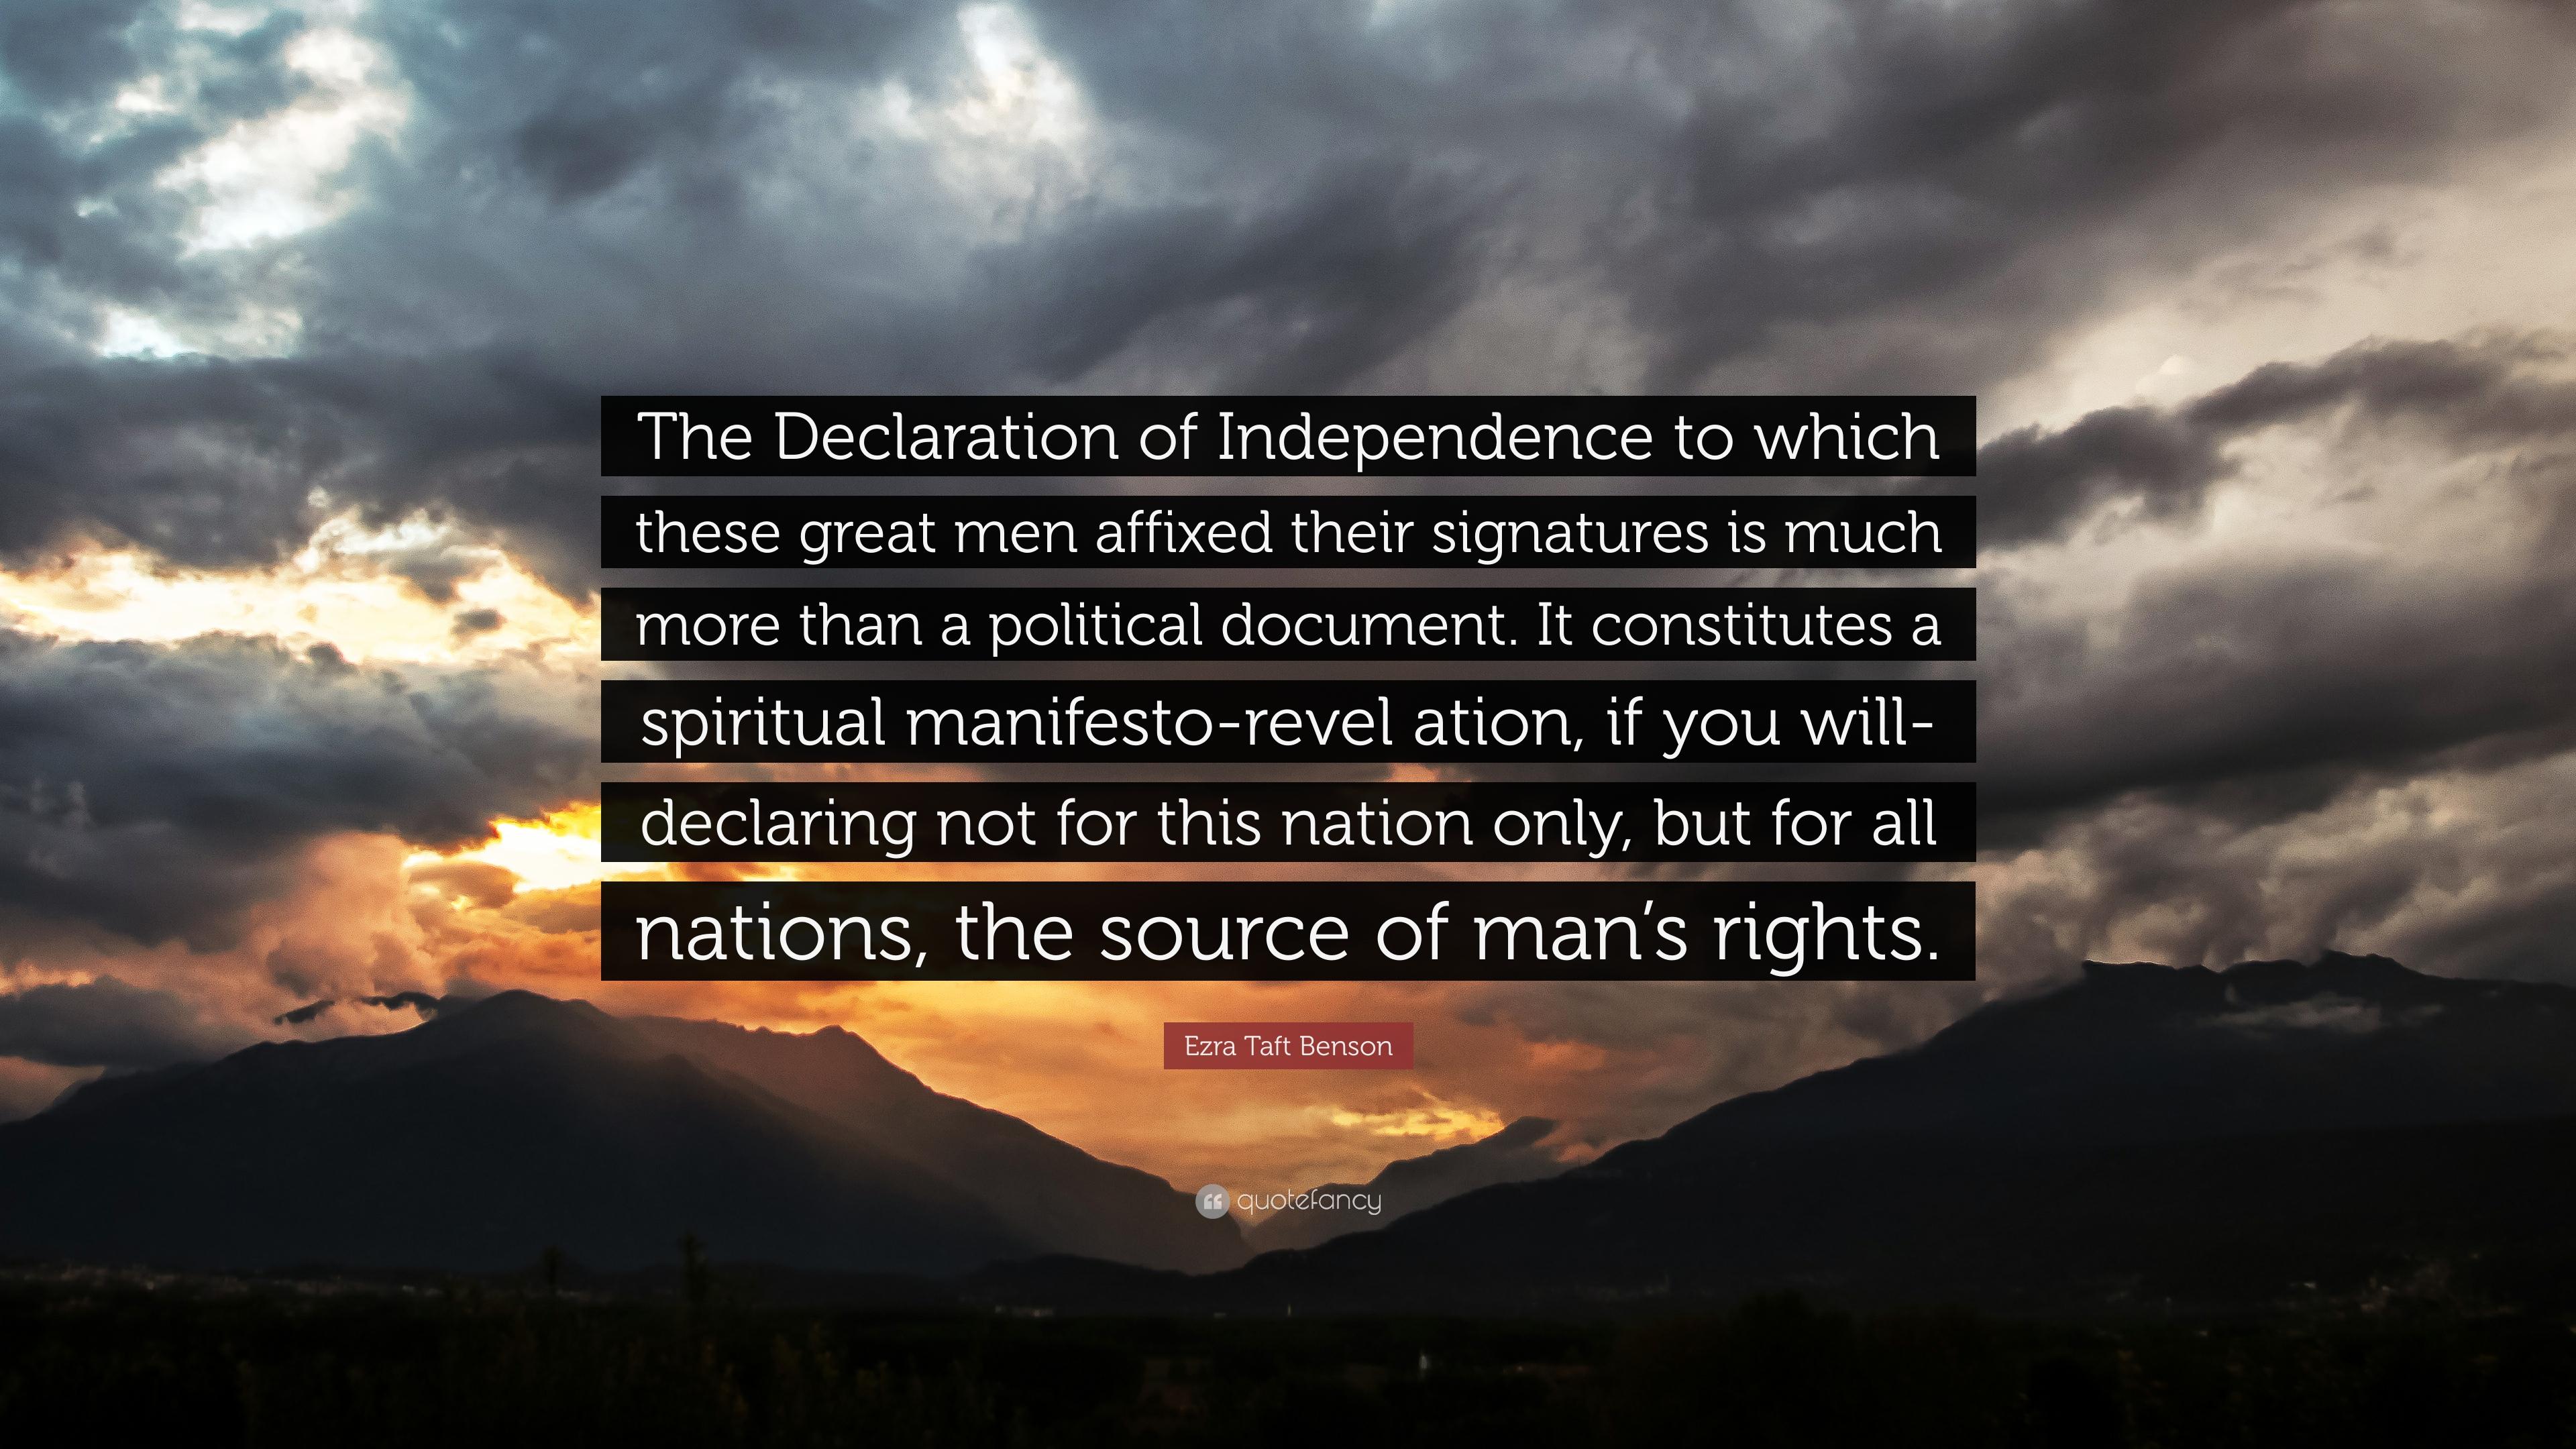 Ezra Taft Benson Quote: “The Declaration of Independence to which